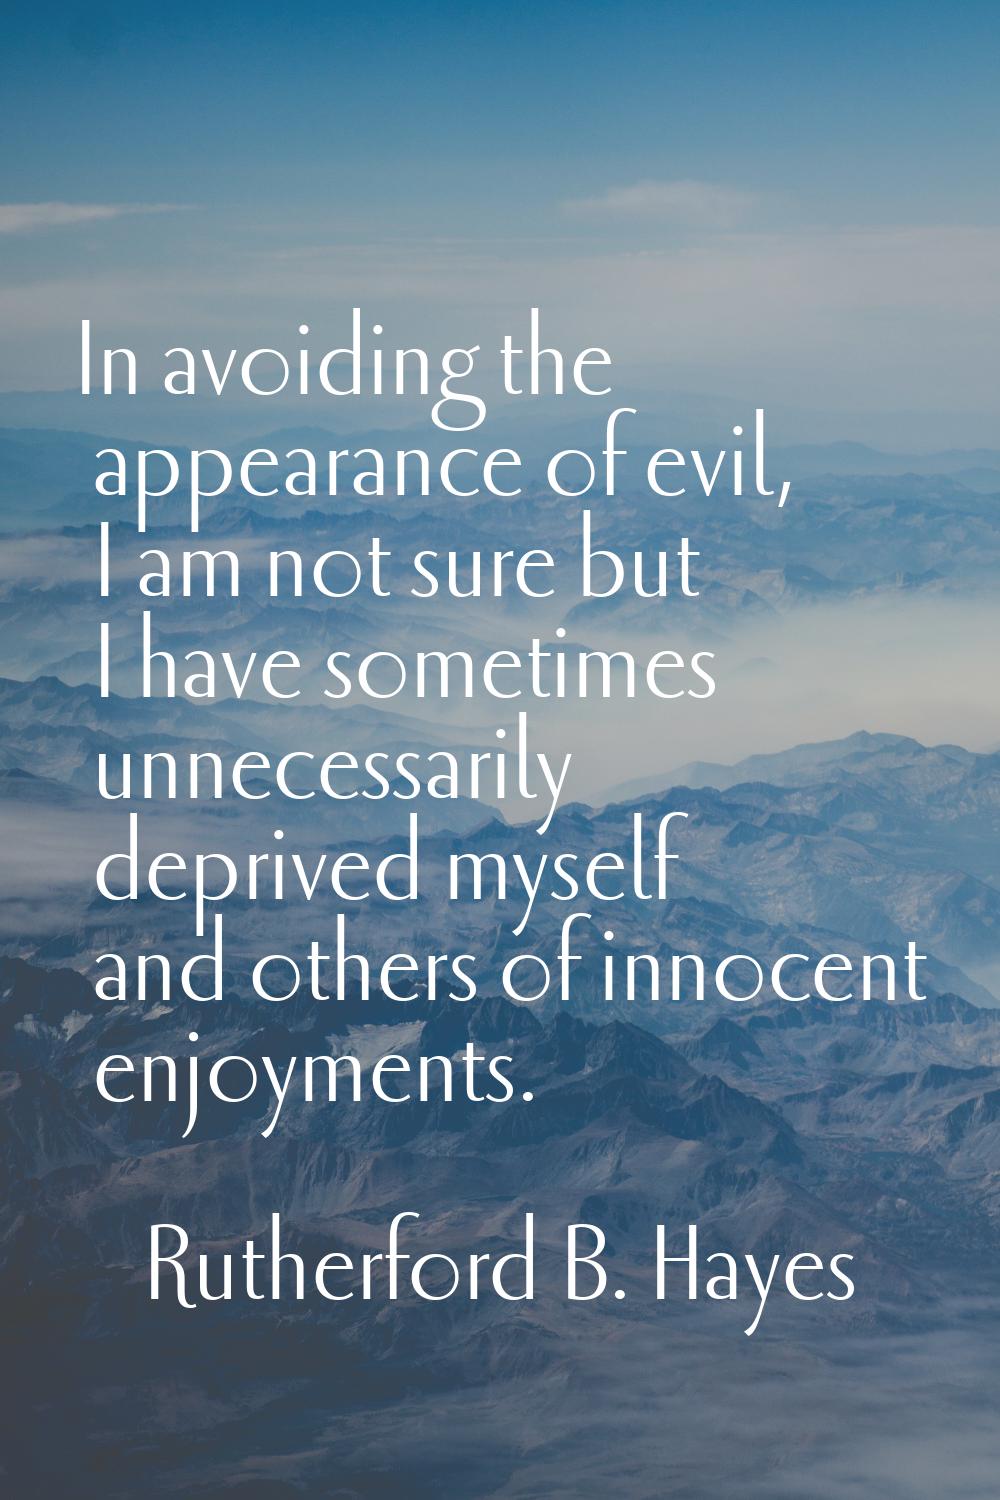 In avoiding the appearance of evil, I am not sure but I have sometimes unnecessarily deprived mysel